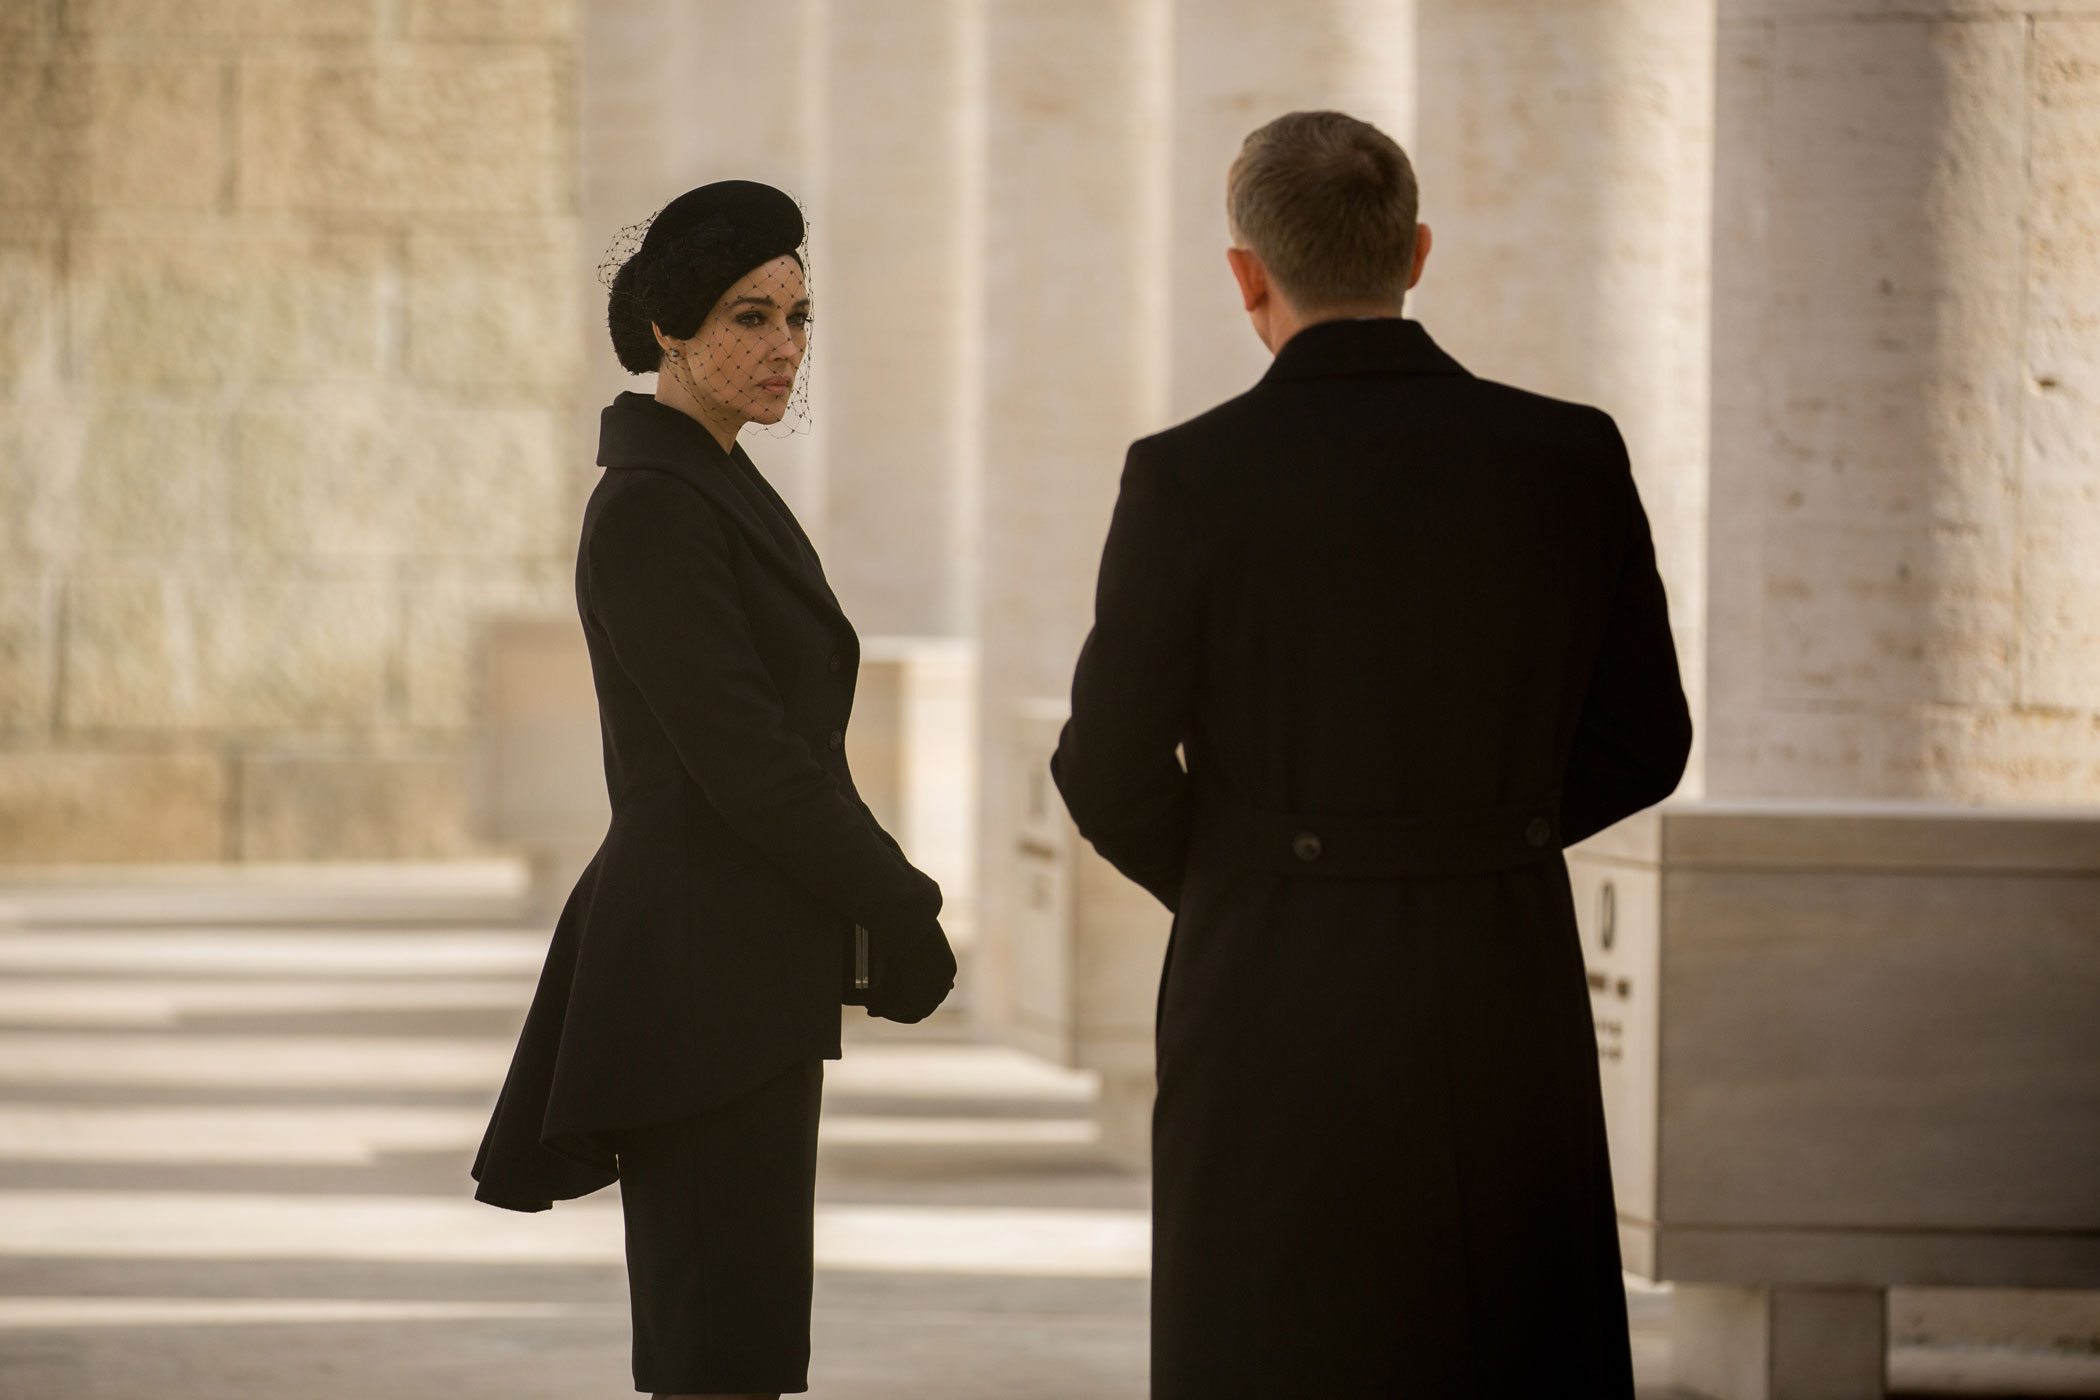 Lucia Sciarra (Monica Bellucci)
                              Spectre, 2015
                              Daniel Craig has promised strong women in the new film, Spectre, including the one played by Monica Bellucci of Matrix Reloaded fame. 'We’ve surrounded him with very strong women who have no problem putting him in his place,” he said in an interview.